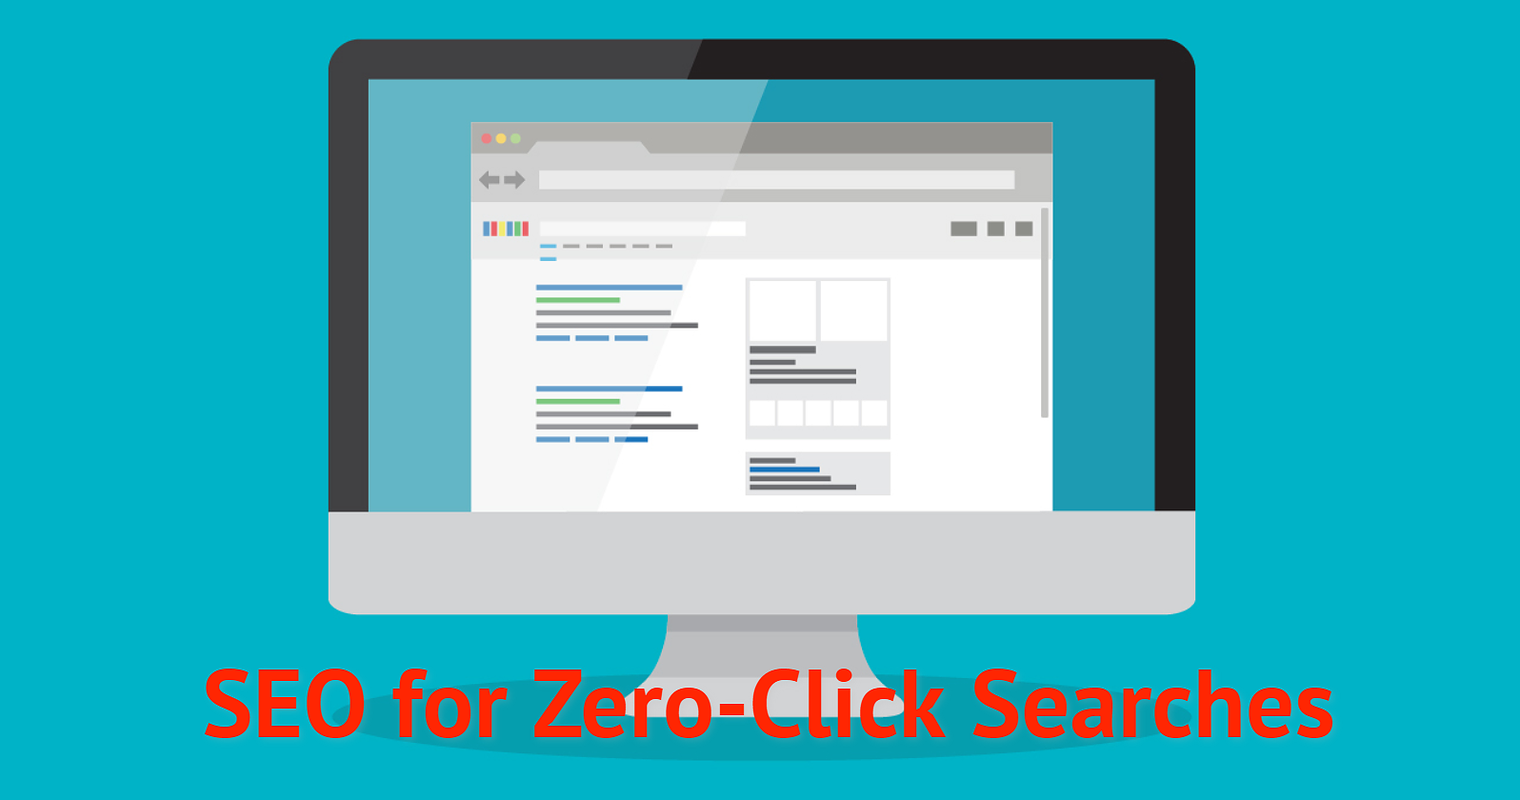 How to Successfully Do SEO for Zero-Click Searches